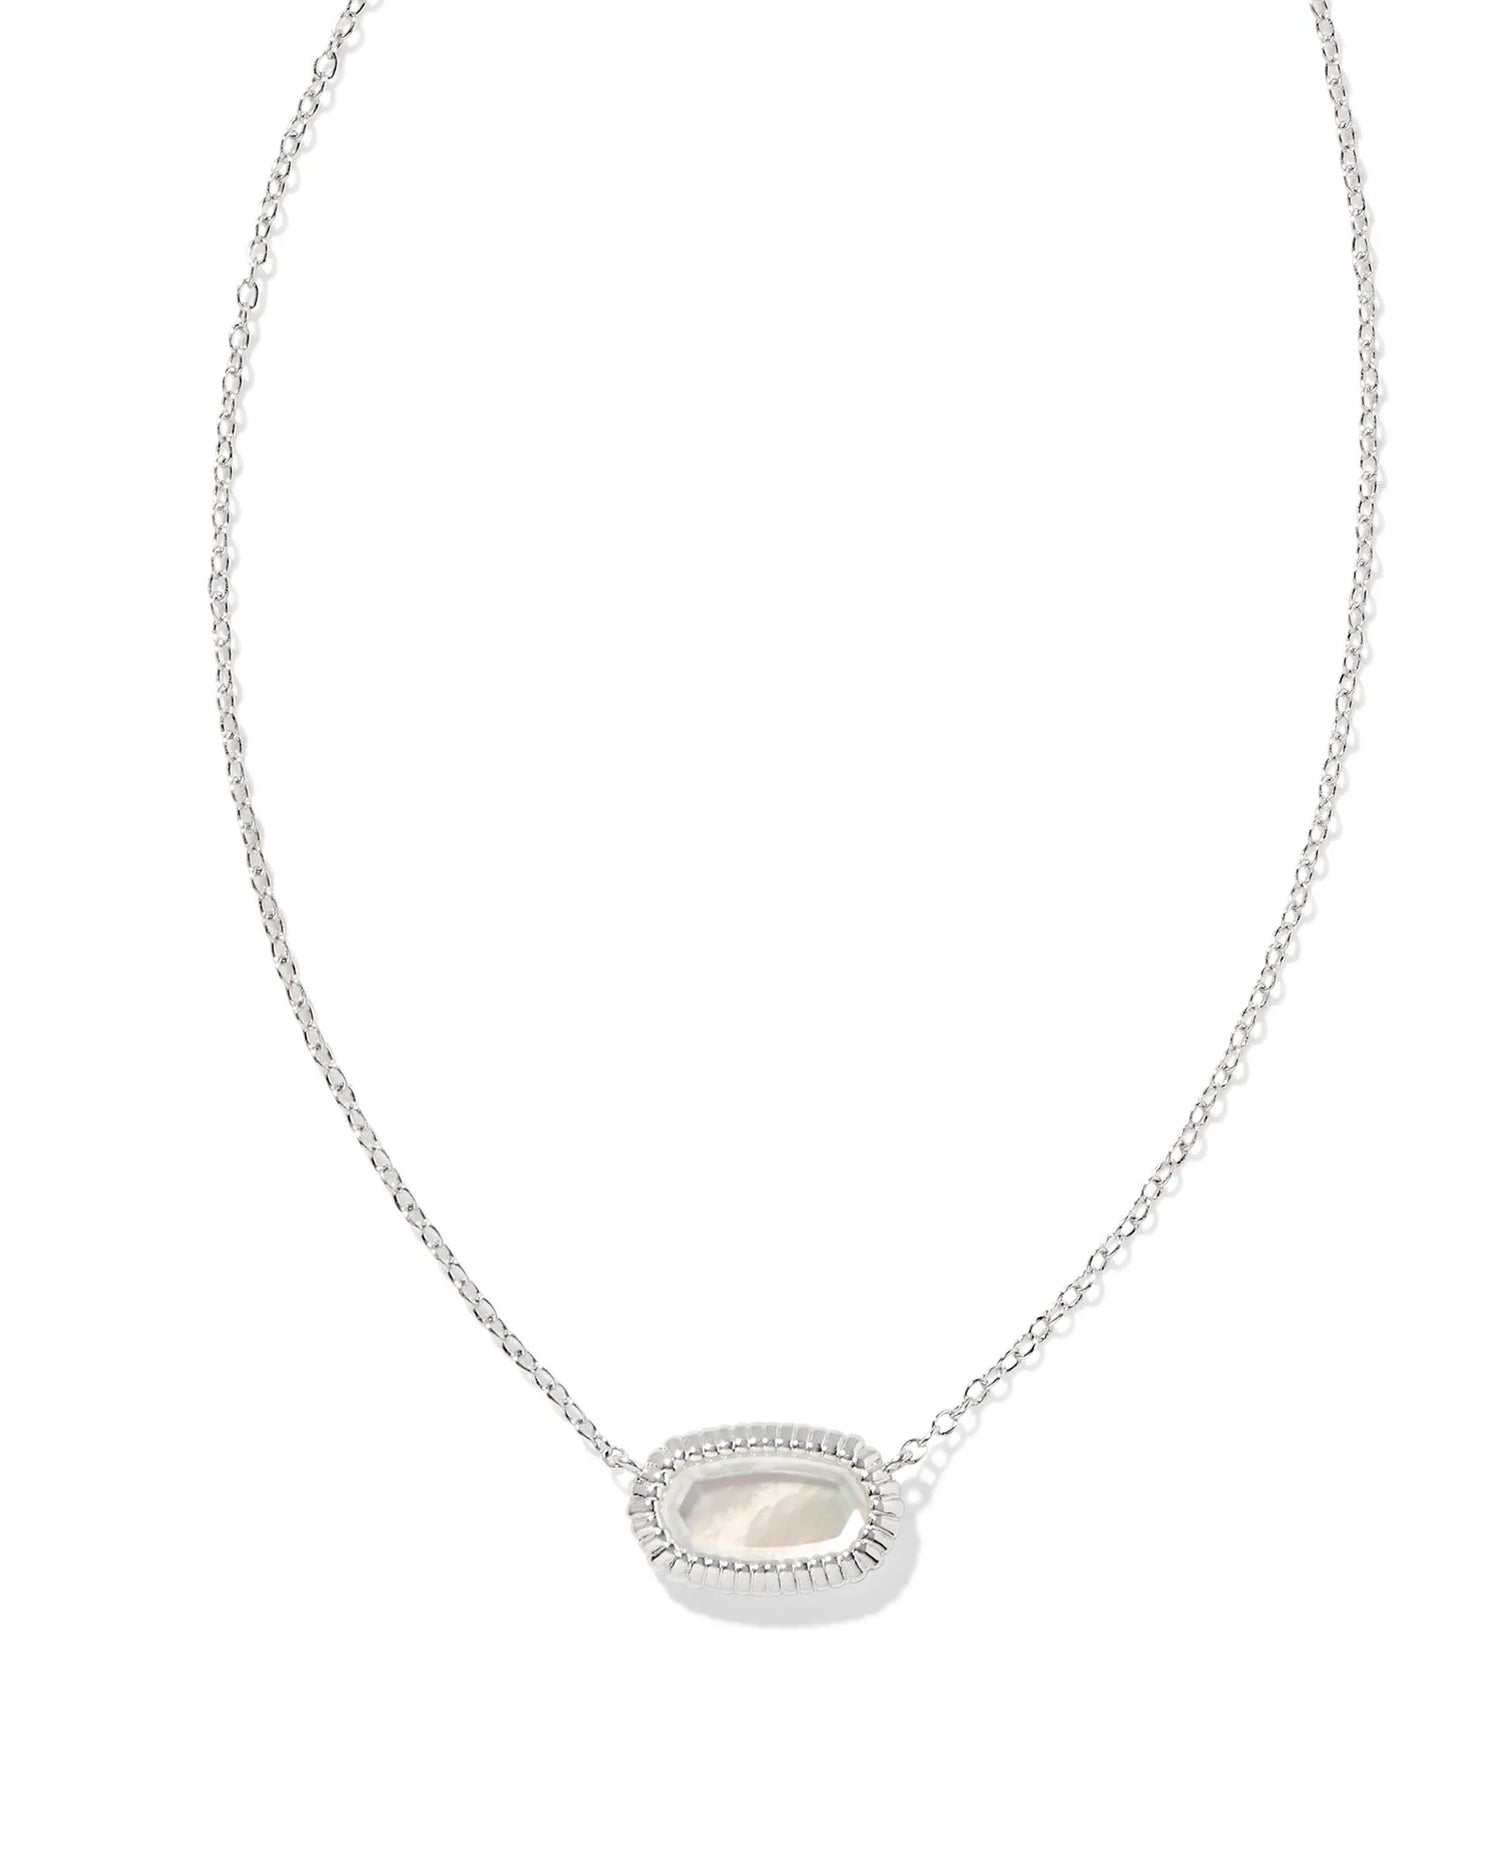 silver necklace with a framed pendant with an ivory mother of pearl  stone